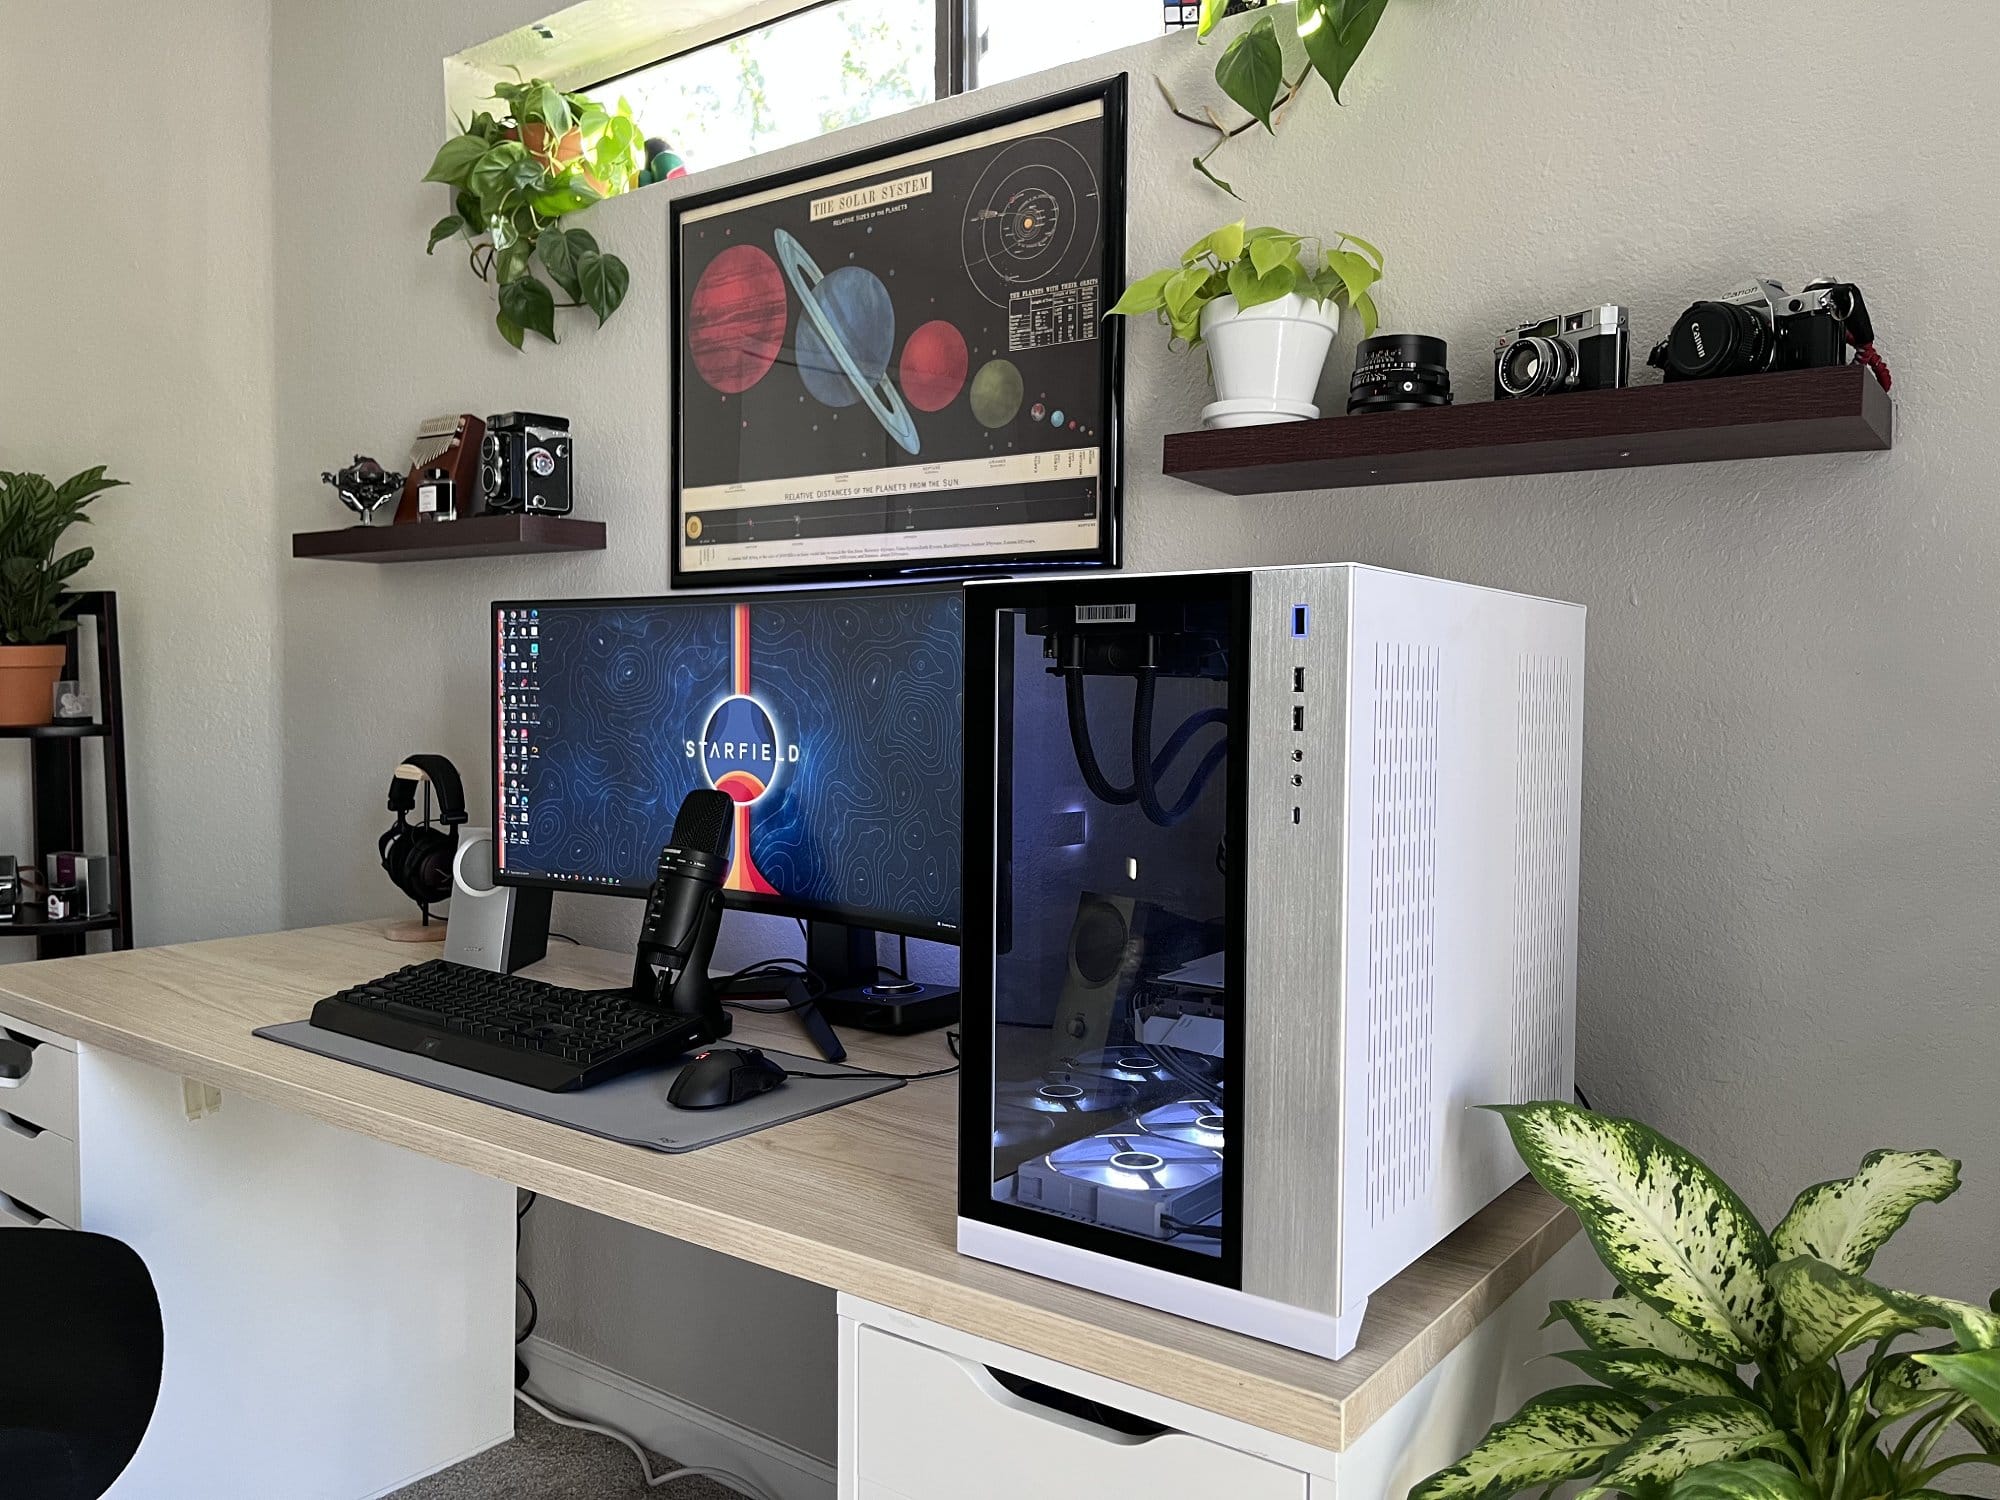 A modern desk setup with an ultrawide monitor displaying STARFIELD, a microphone, a gaming keyboard and mouse, a PC with a glass side panel, and decorative shelves with cameras and plants